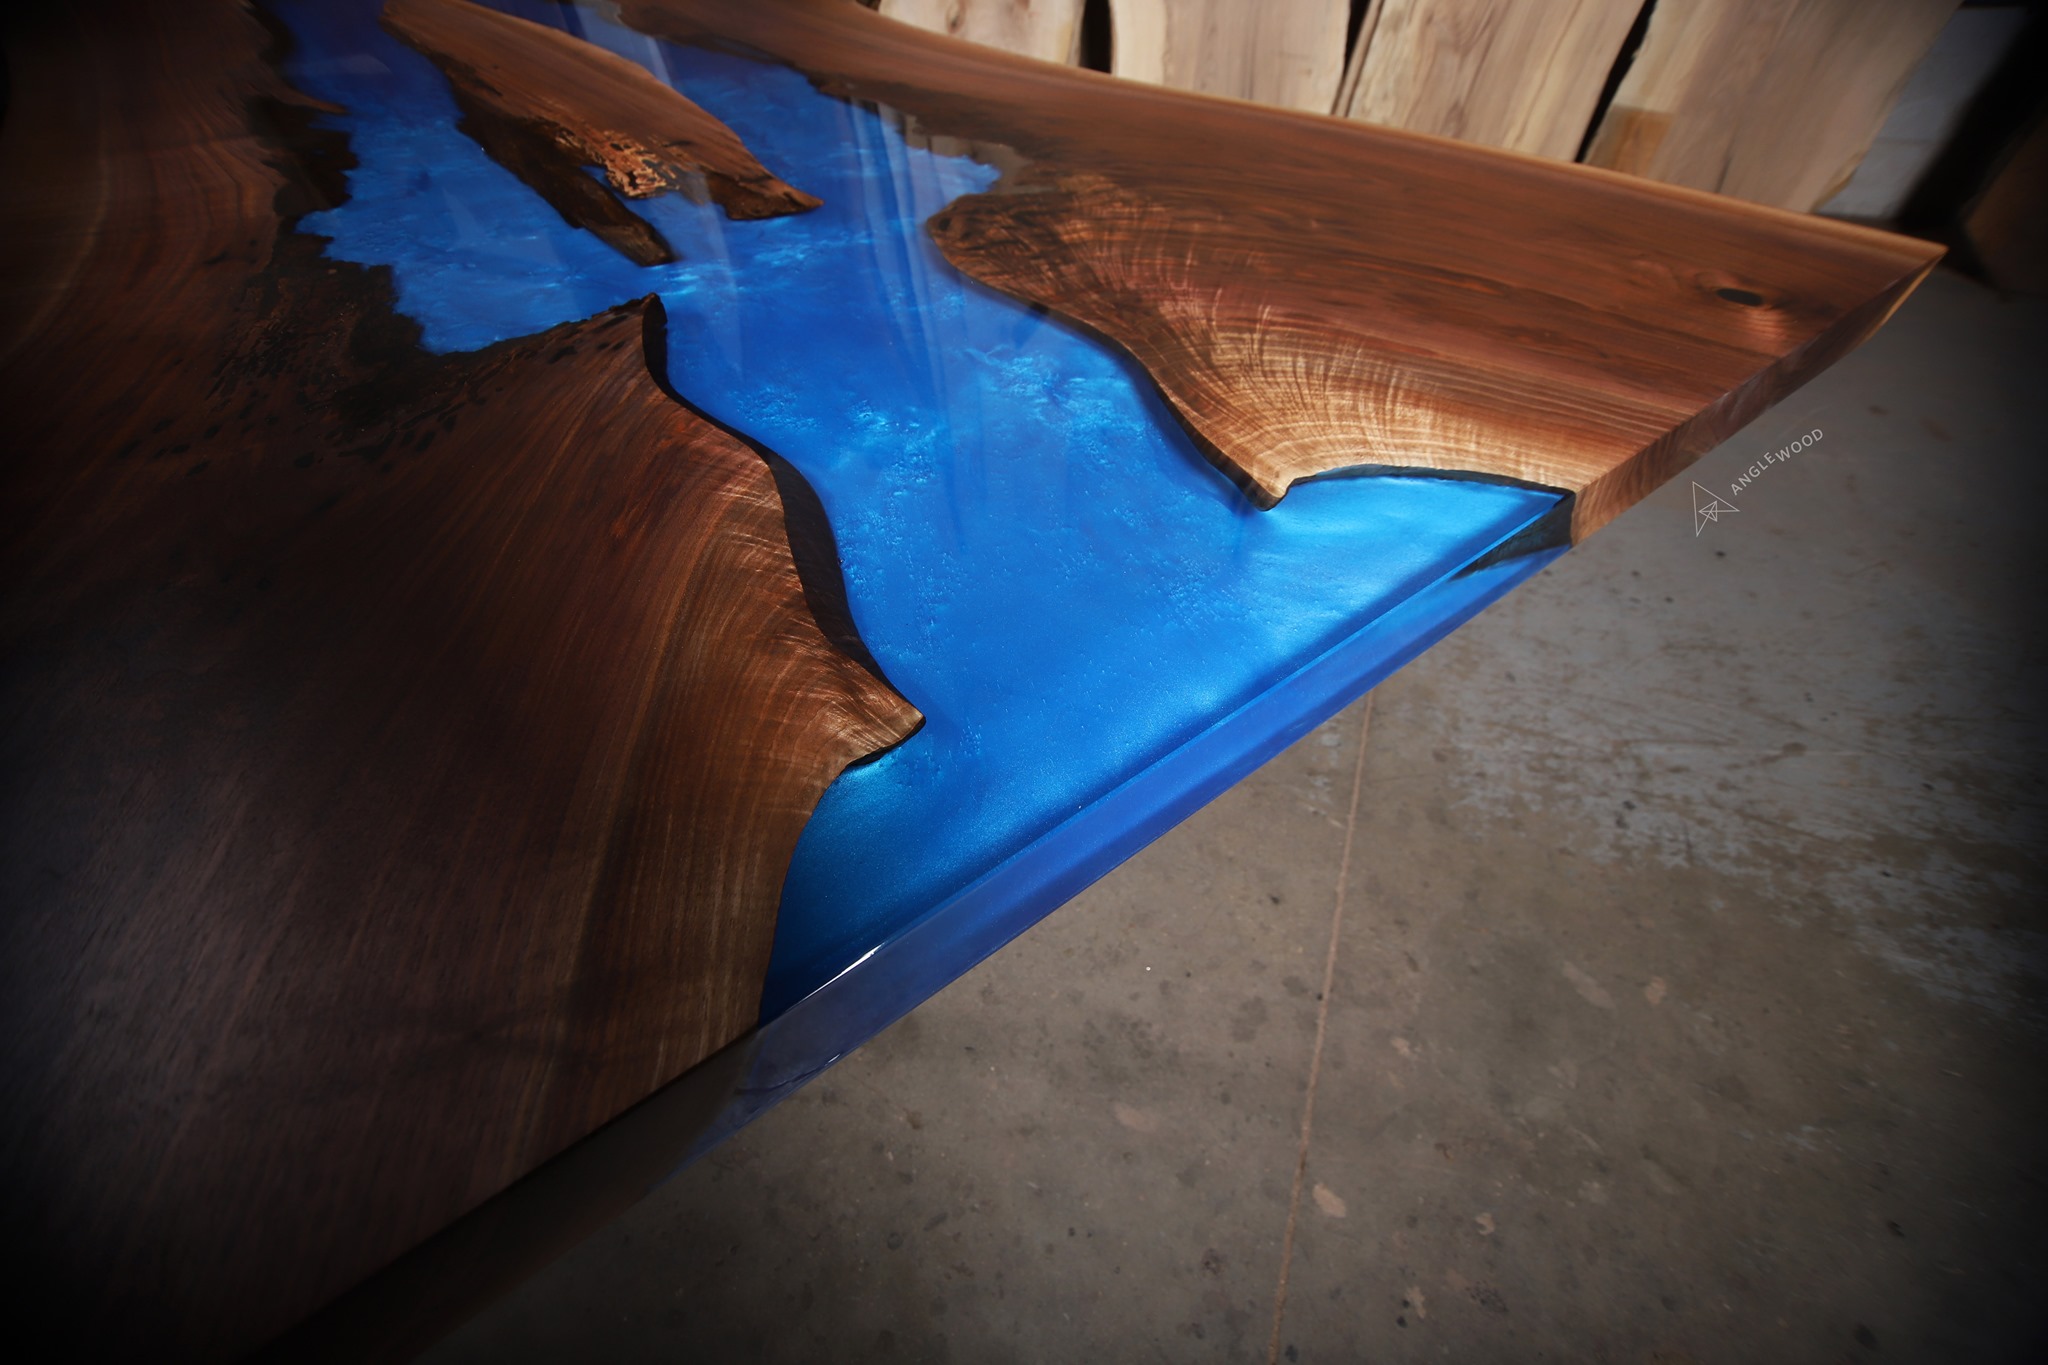 Walnut Live Edge Dining Table with Blue Epoxy River